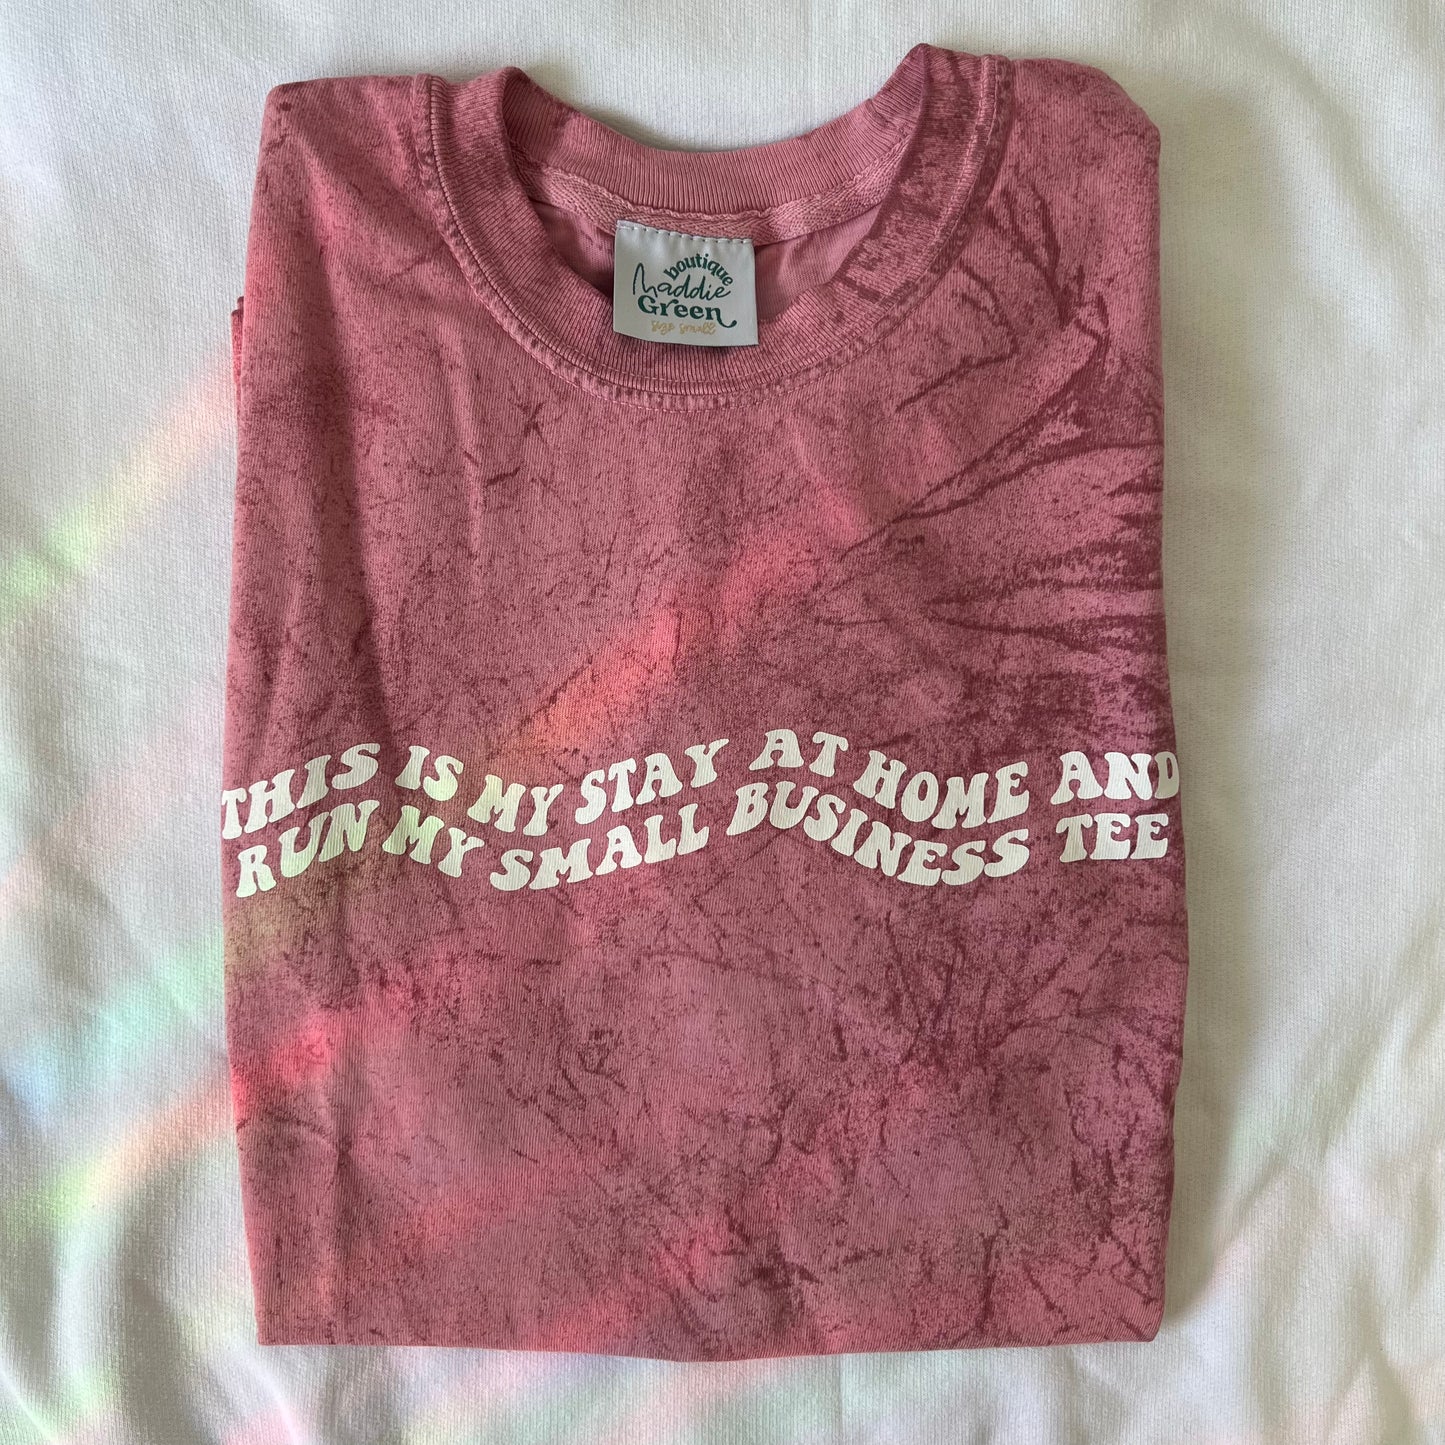 Dusty Rose Tie Dye Stay at Home and Run my Small Business Tee